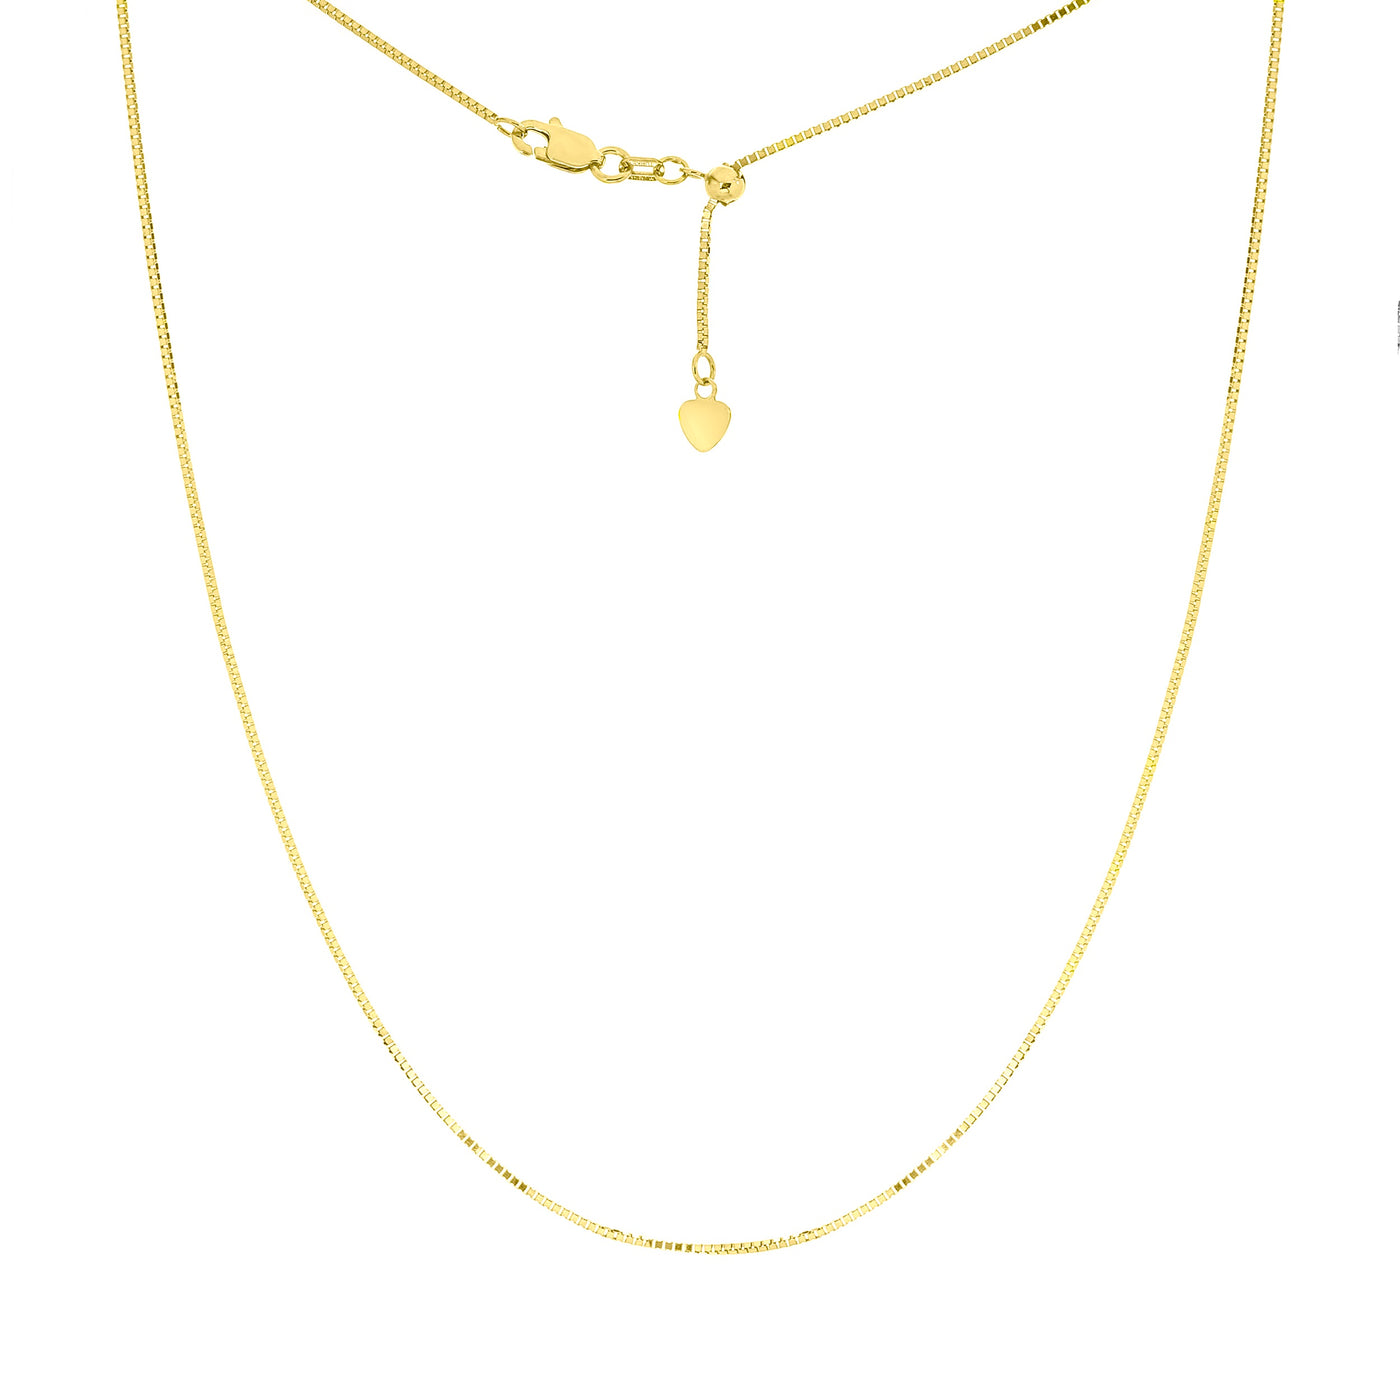 Box Chain (Adjustable up to 22”) - Lauren Sigman Collection